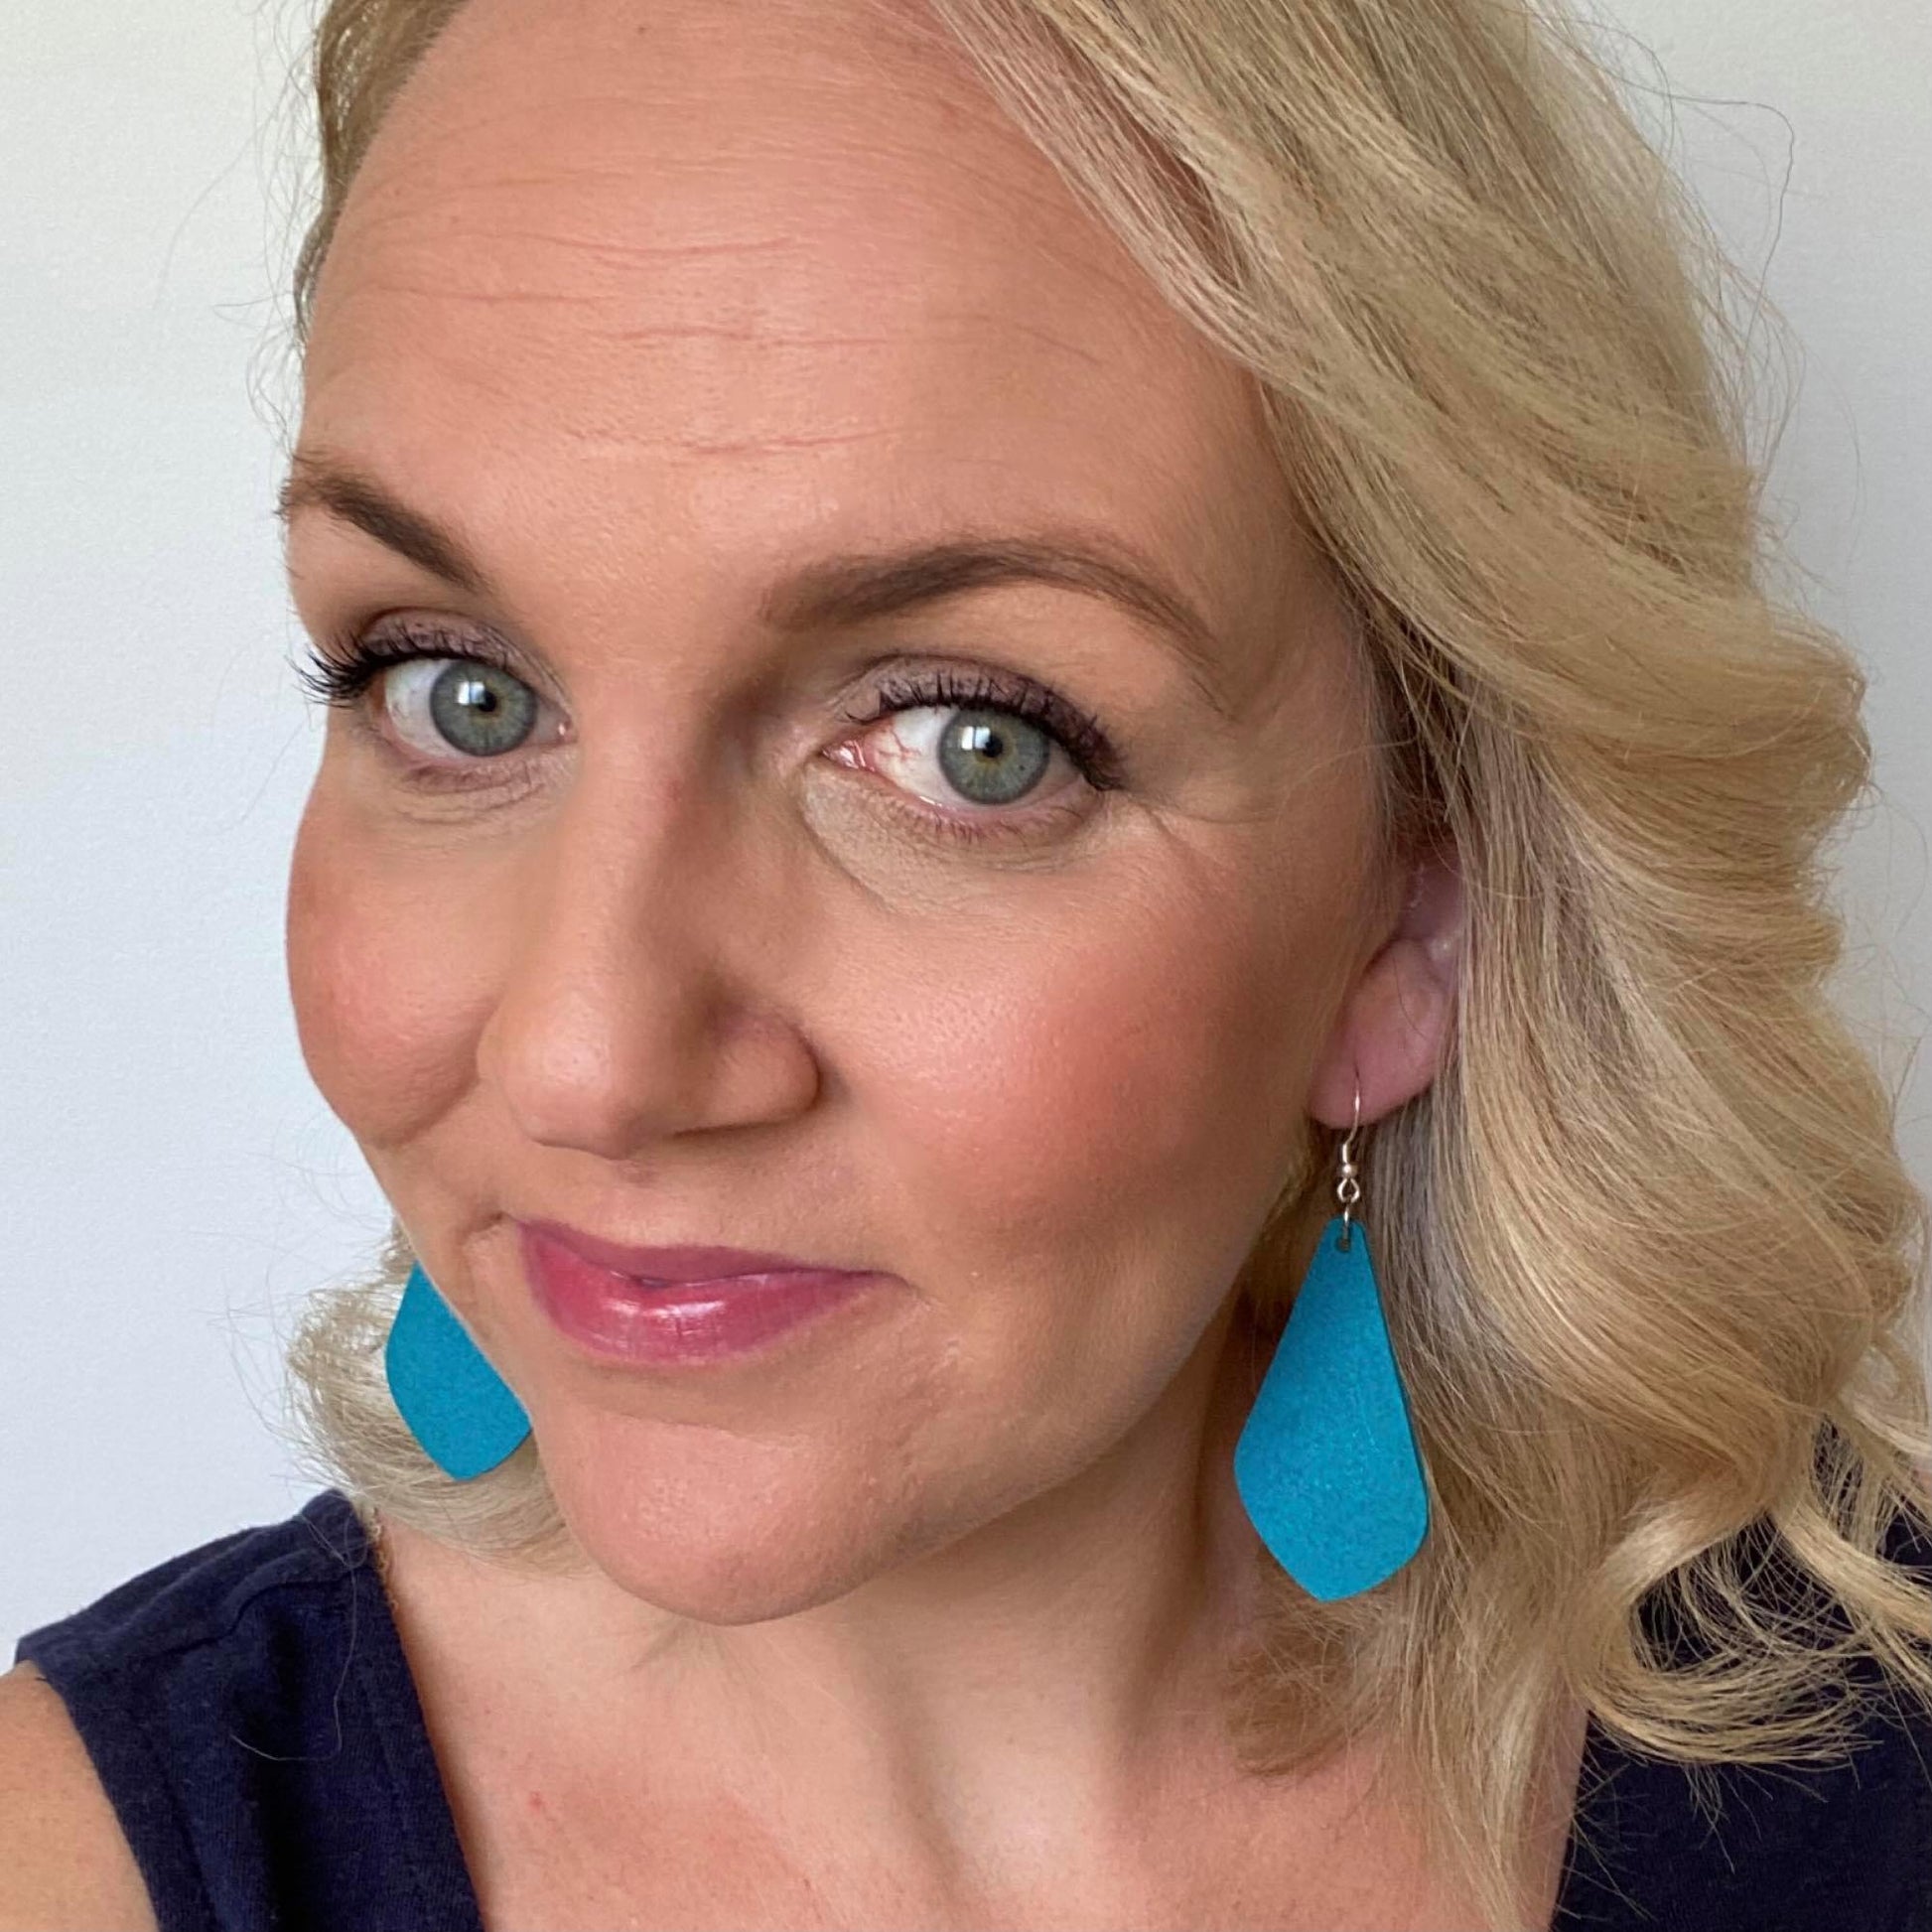 Teal Diamond Drops selfie. Earrings made out of Faux suede leather with silver coloured hooks.